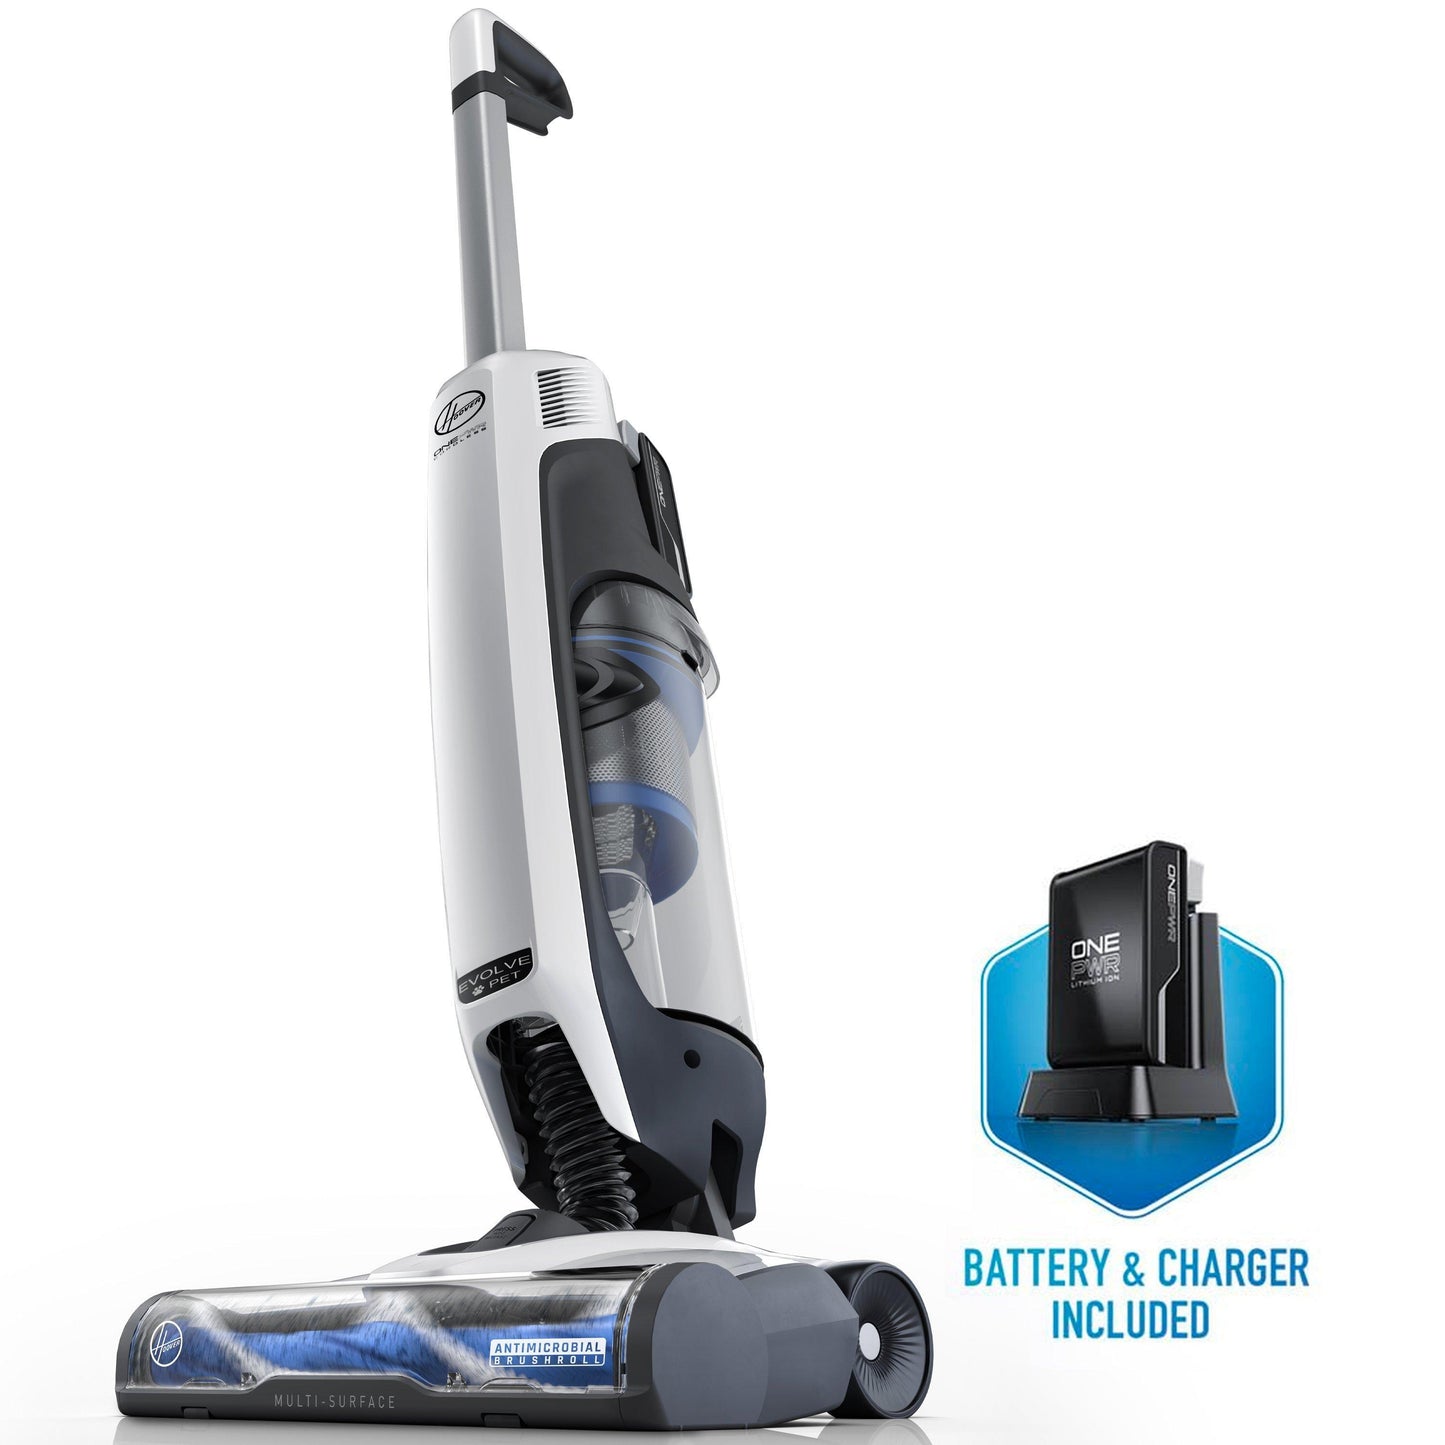 The Evolve Pet upright cordless vacuum stands on its own with the battery and charger.